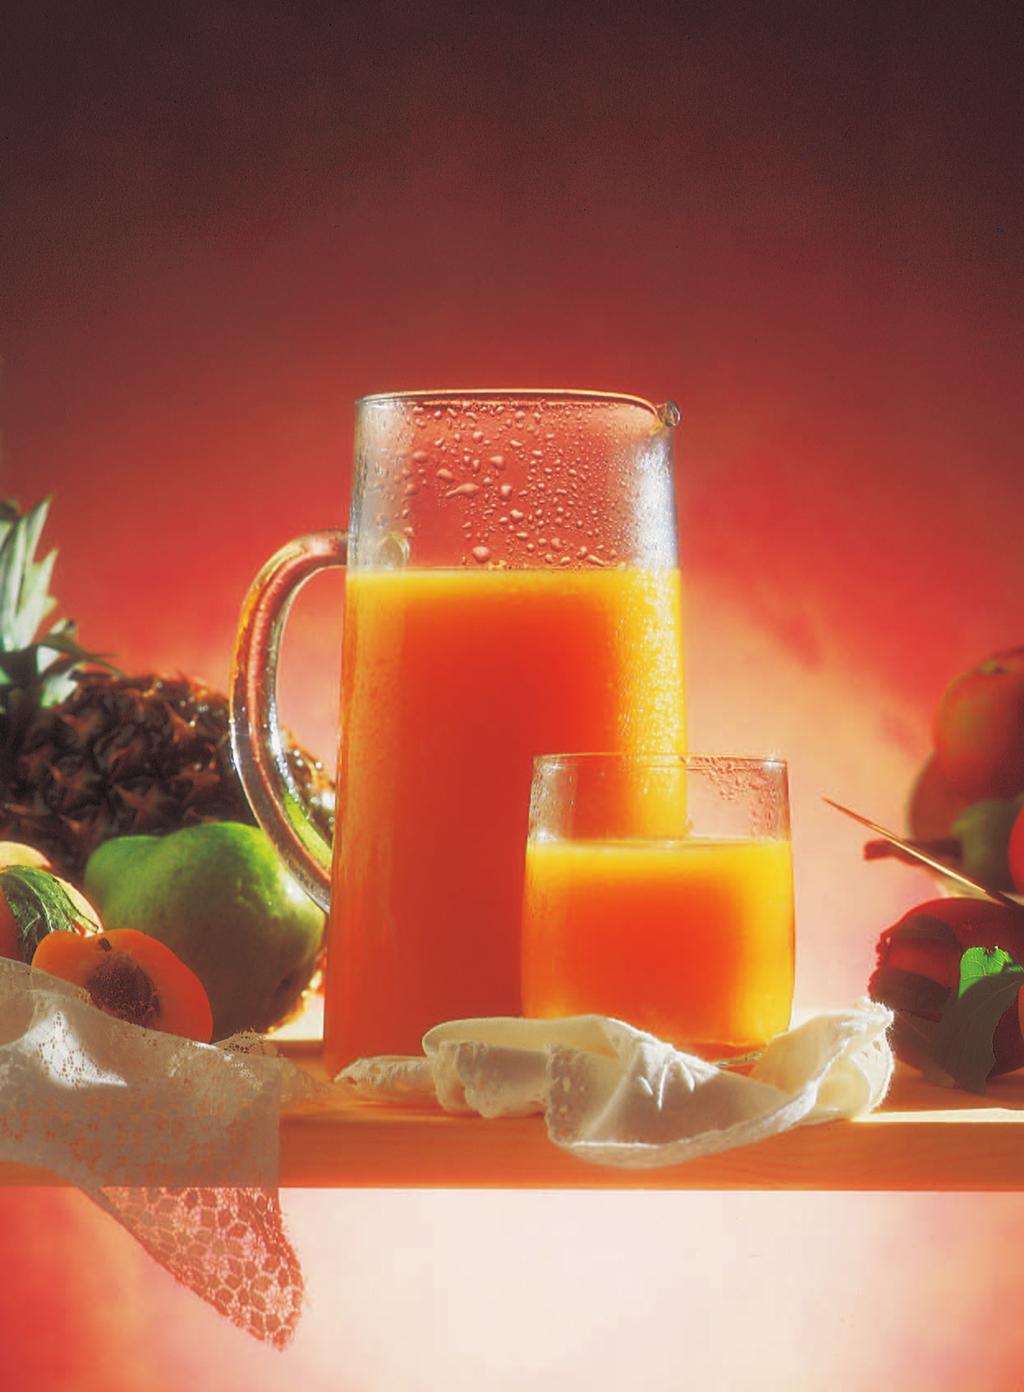 Fruit juices Italy is well-known as one of the world biggest producers of fruits and tomato as well.